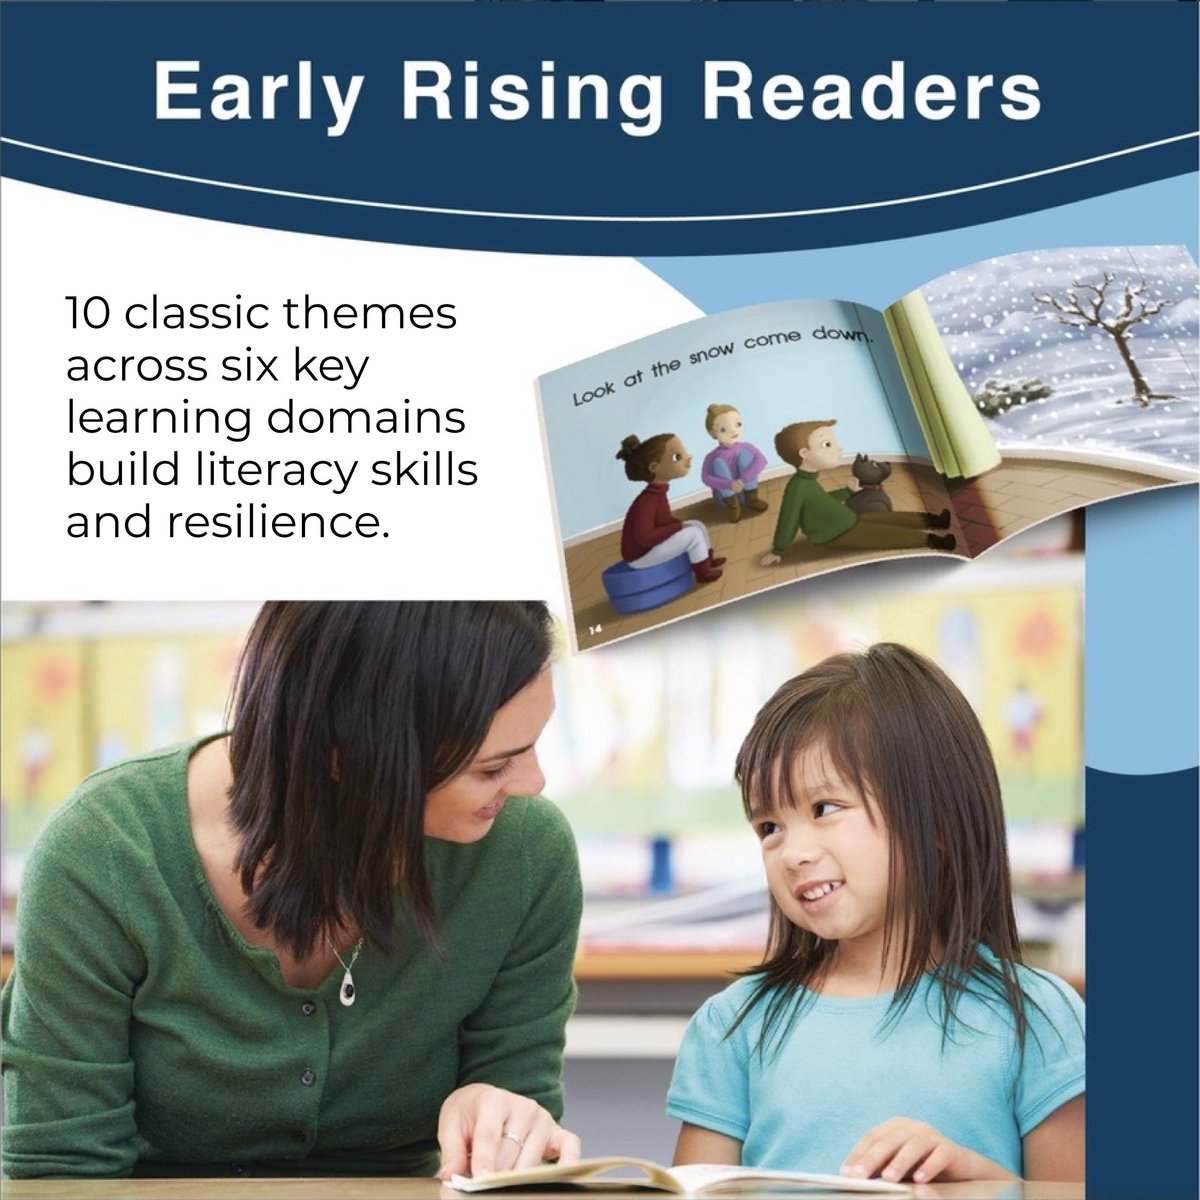 Early Rising Readers nurtures literacy knowledge with 180 fiction and non-fiction books, family learning components, and exceptional instructional materials across six key content areas — available in English and Spanish! Learn more→ hubs.ly/Q02r-mkS0